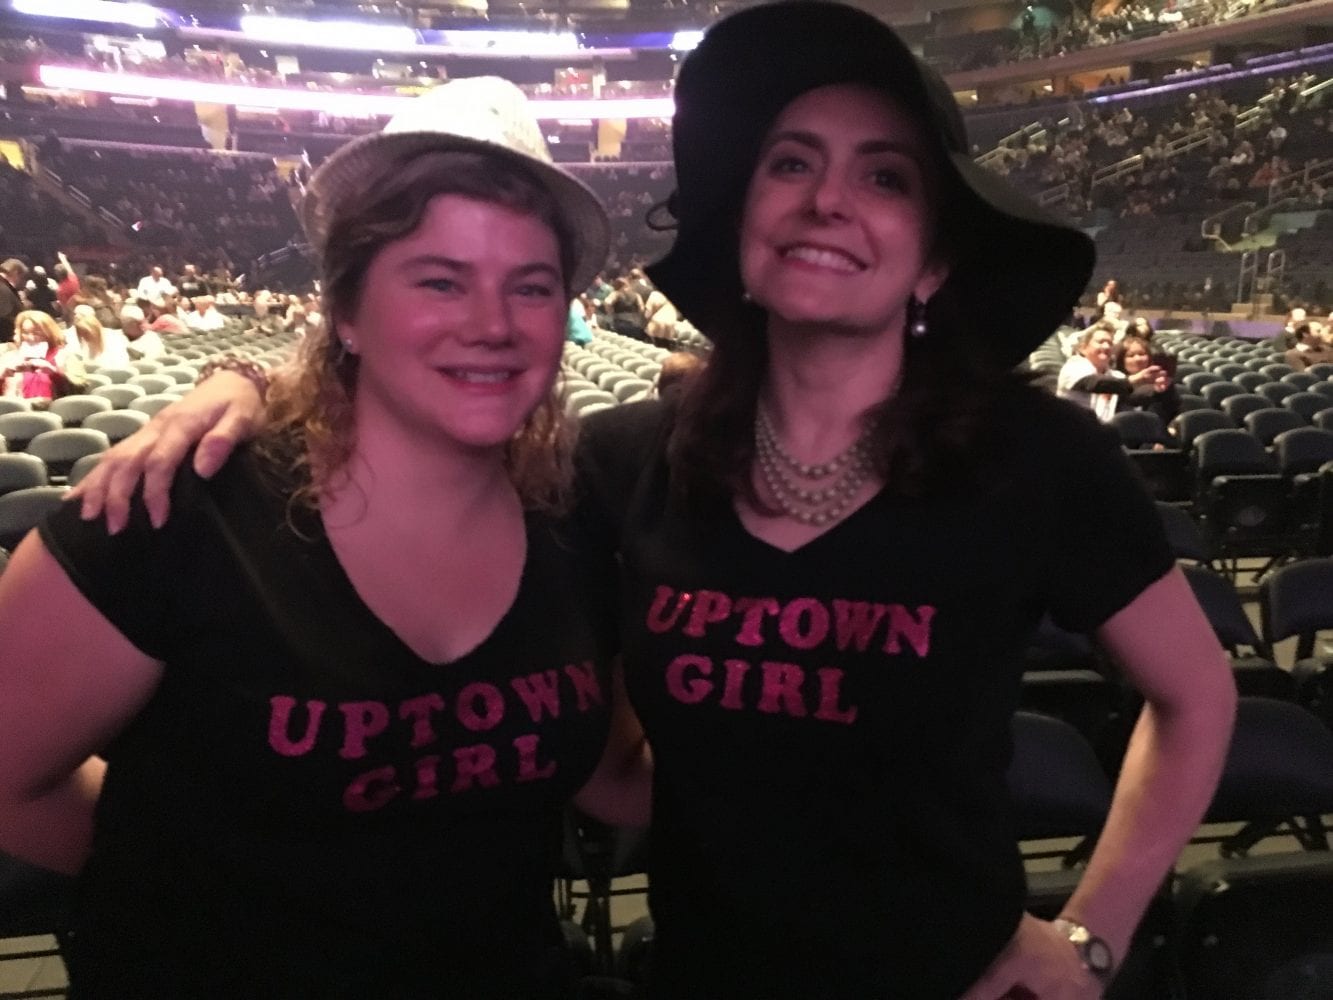 How to Find Cheap Concert Tickets: My Billy Joel Experience - Pia and Leslie in Uptown Girl garb